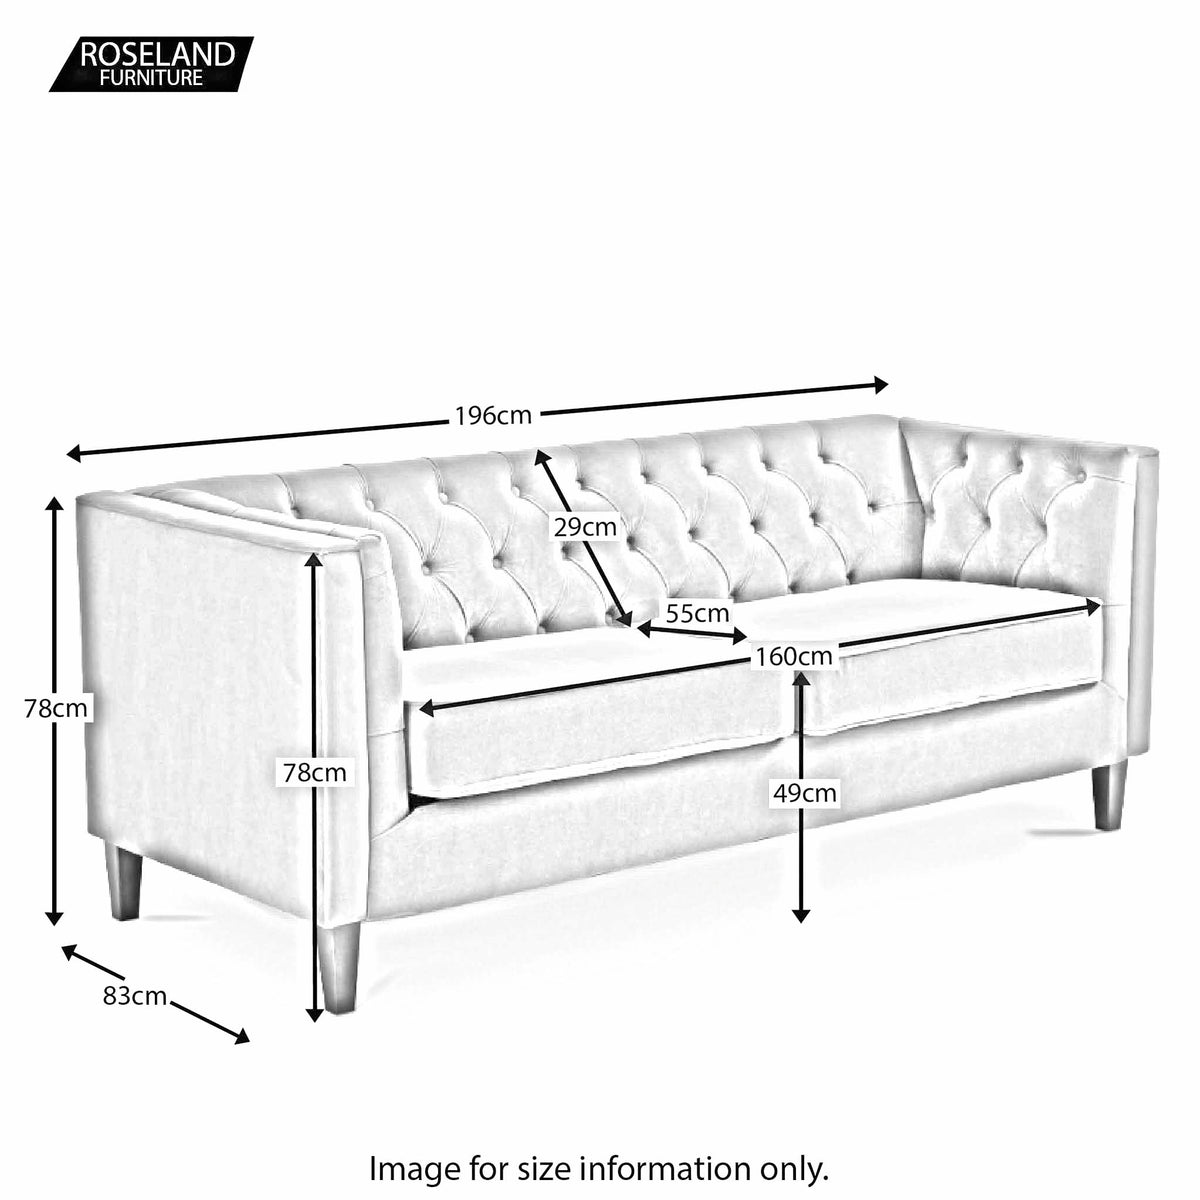 Eliza Heather 3 Seater Chesterfield Sofa - Size guide